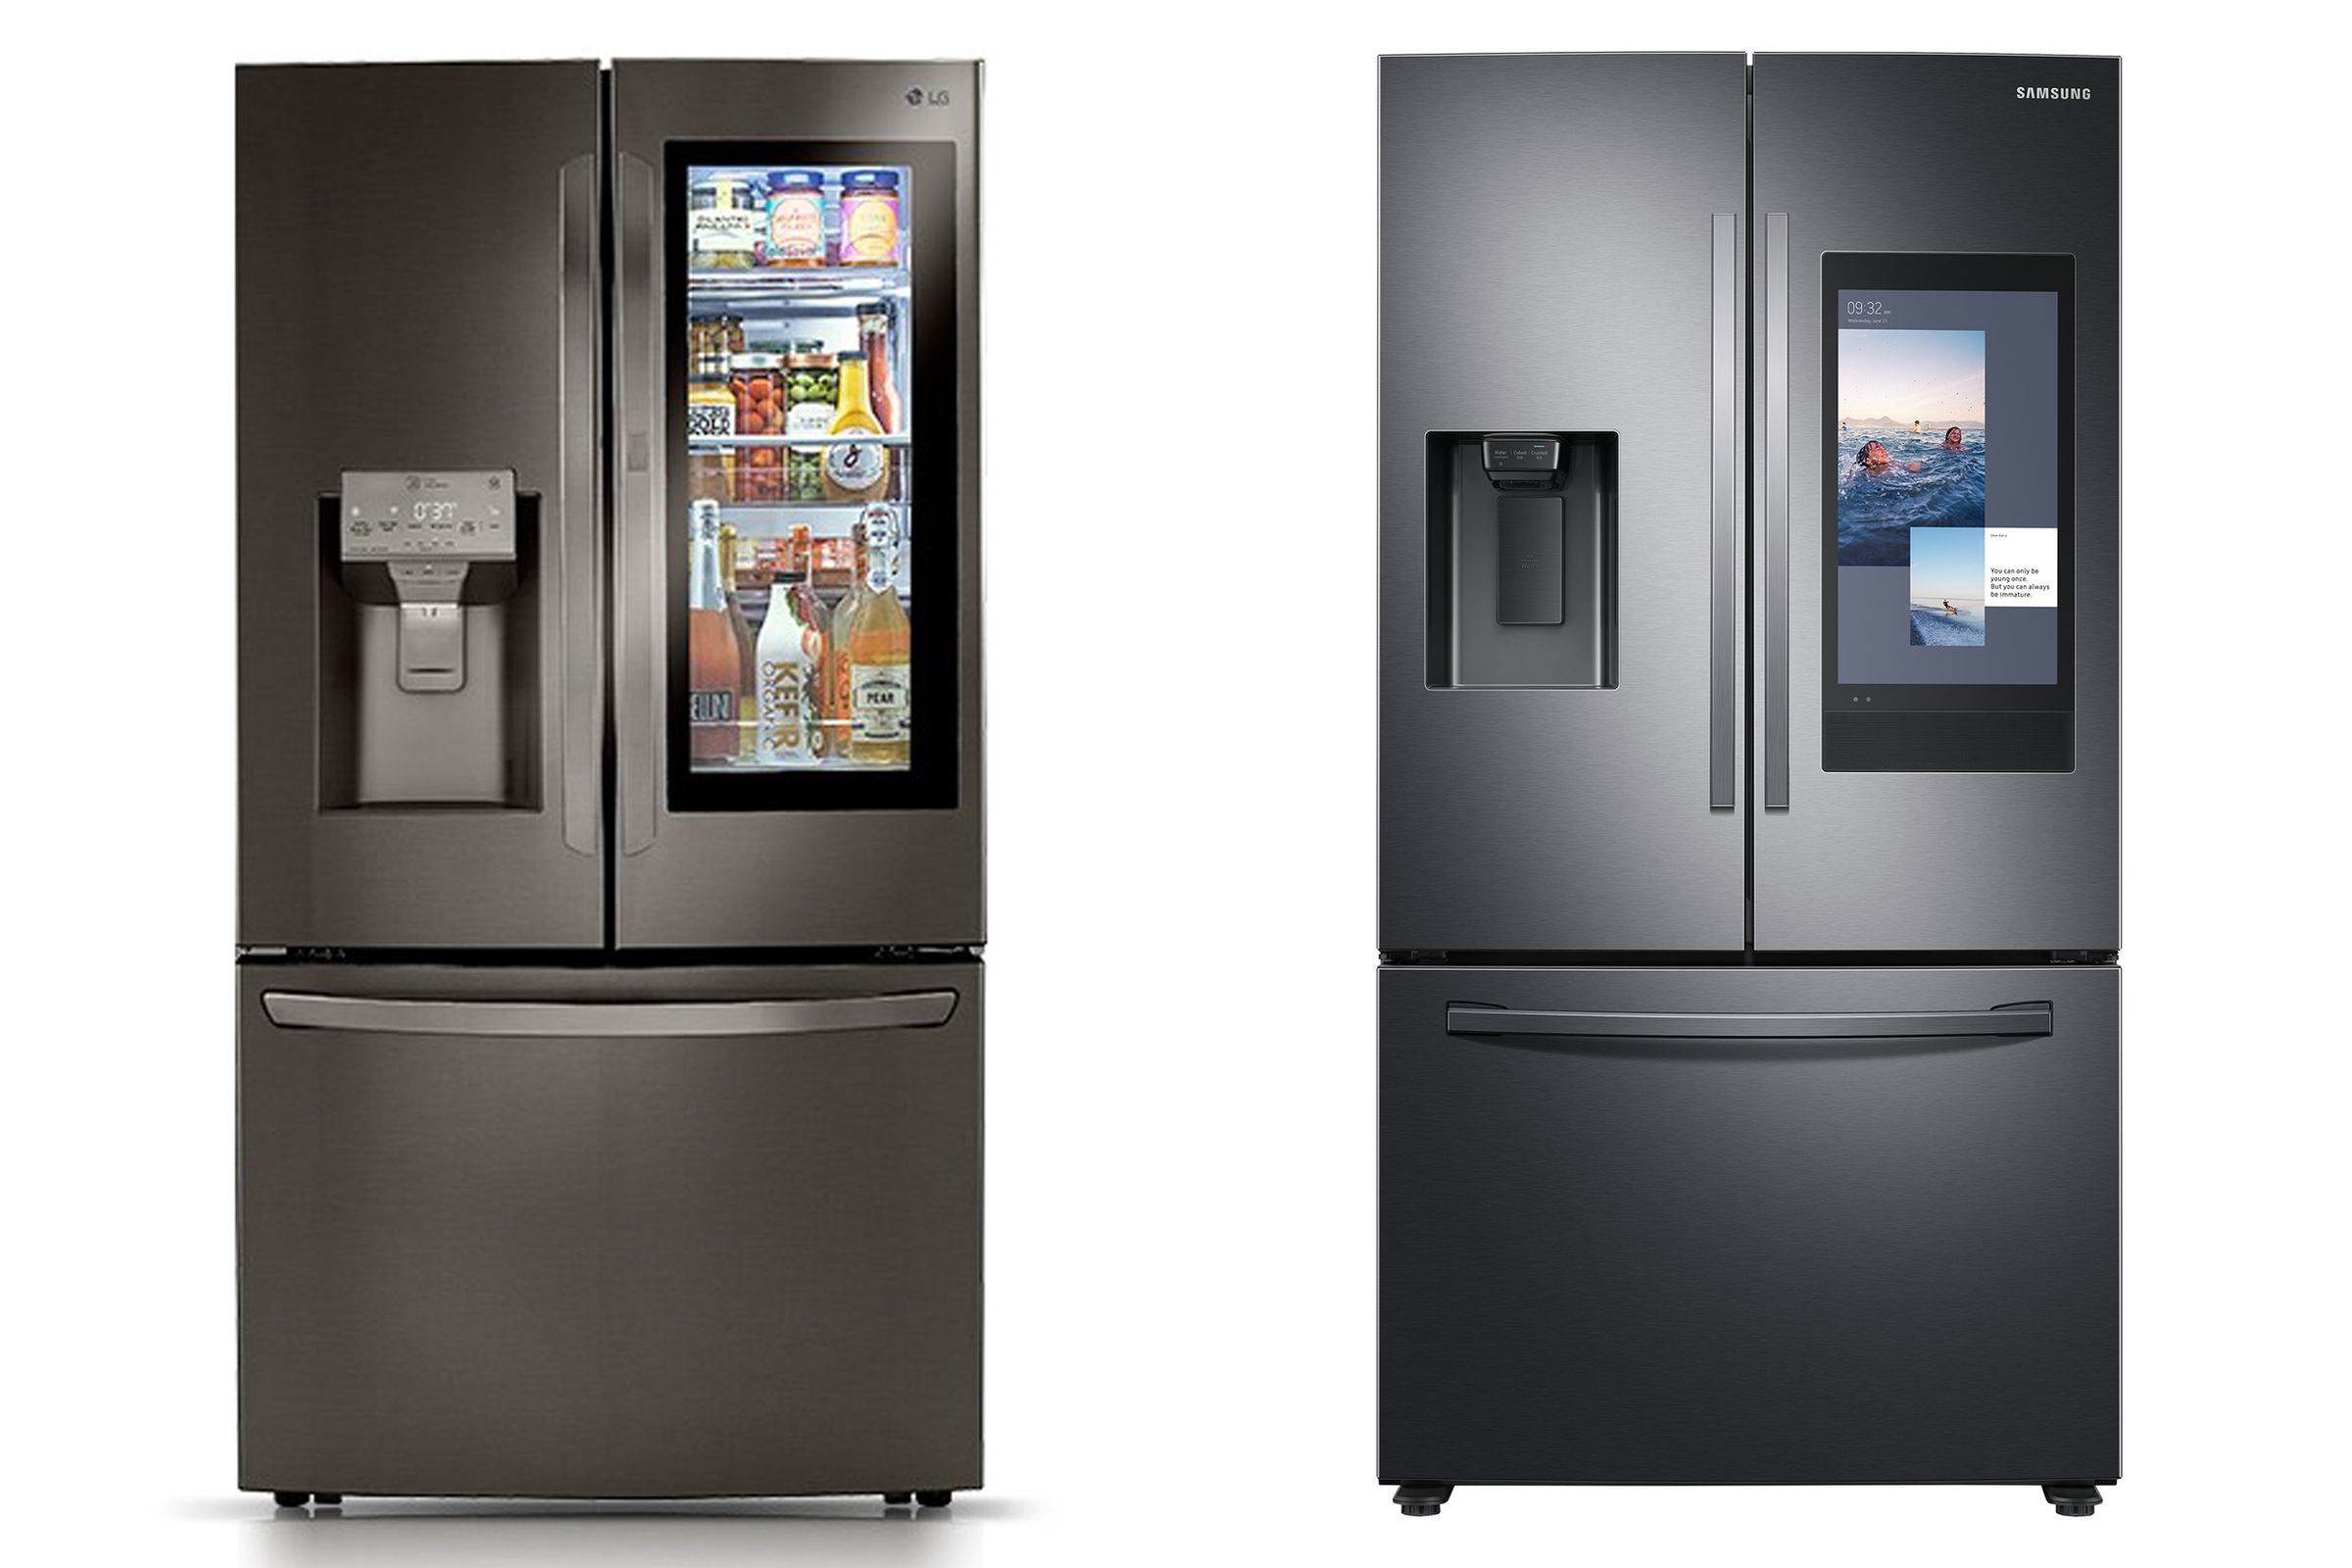 Samsung and LG’s smart fridges from CES 2020.